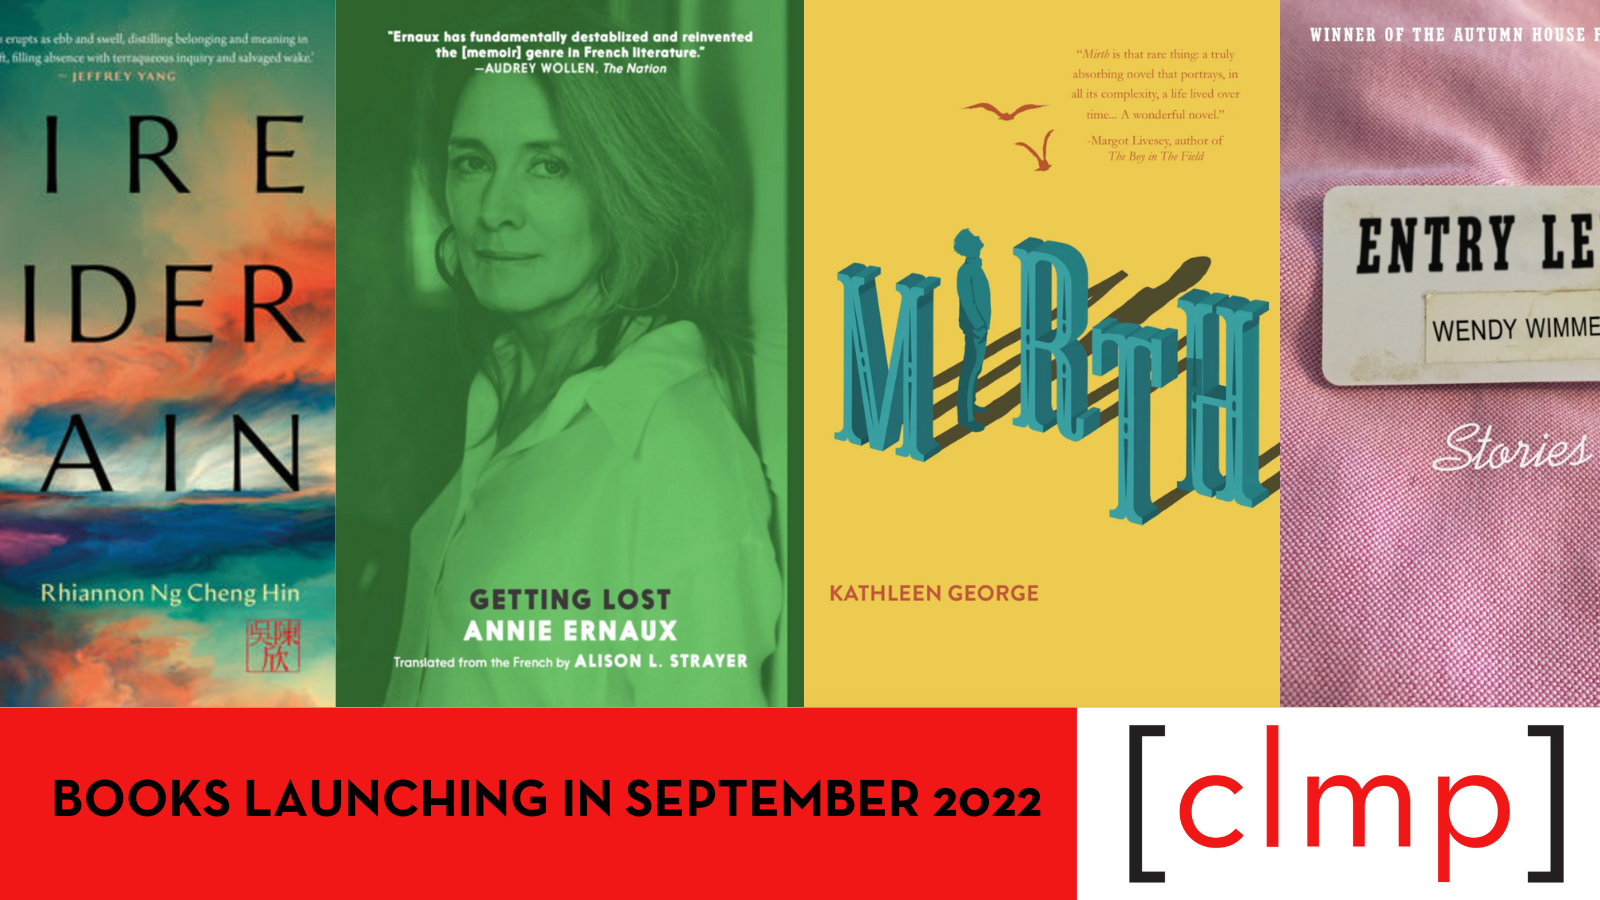 Books Launching in September 2022 pic